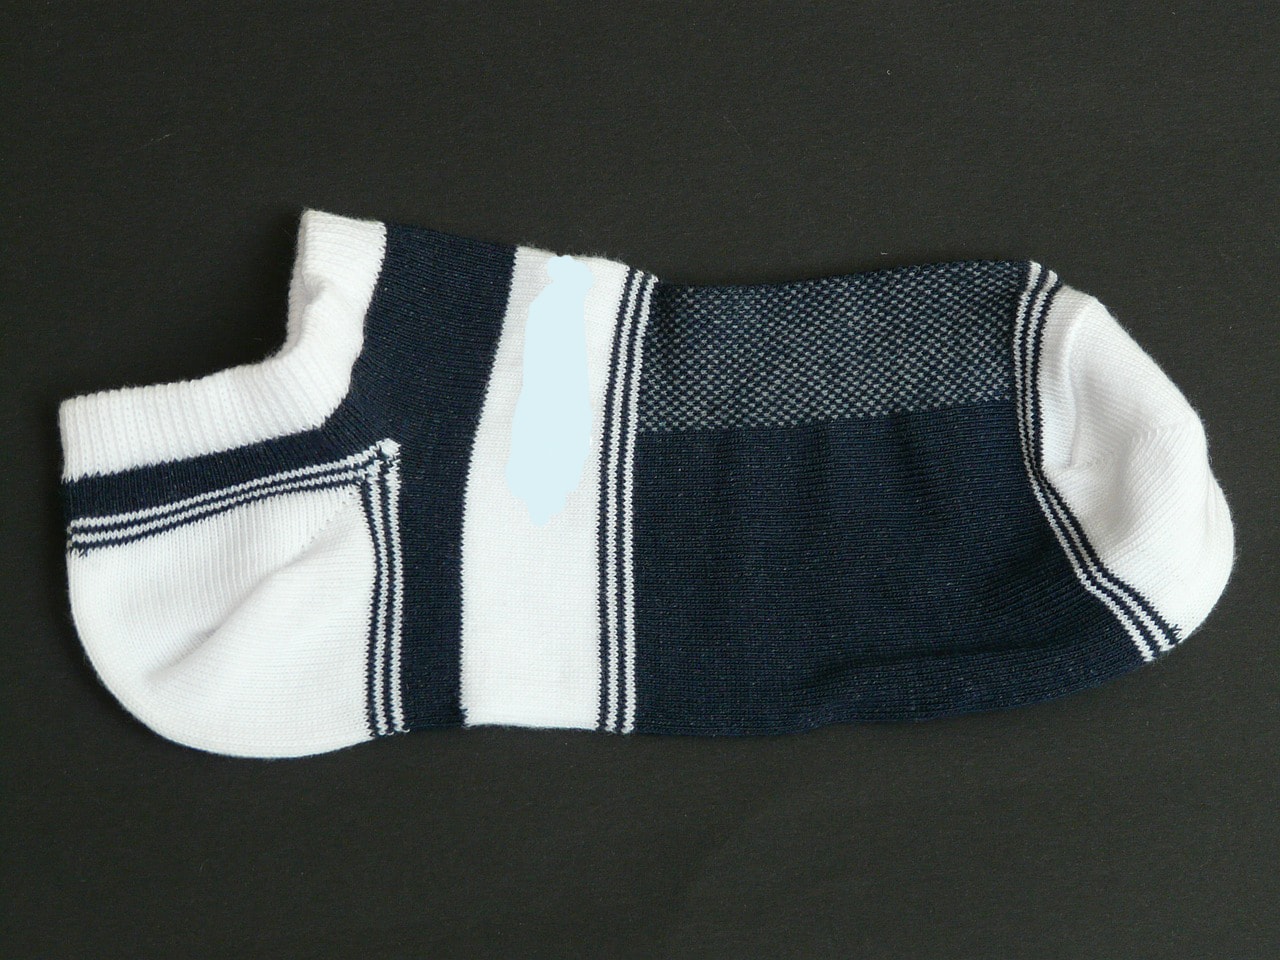 A gray and white Nike ankle sock lying on a bed.